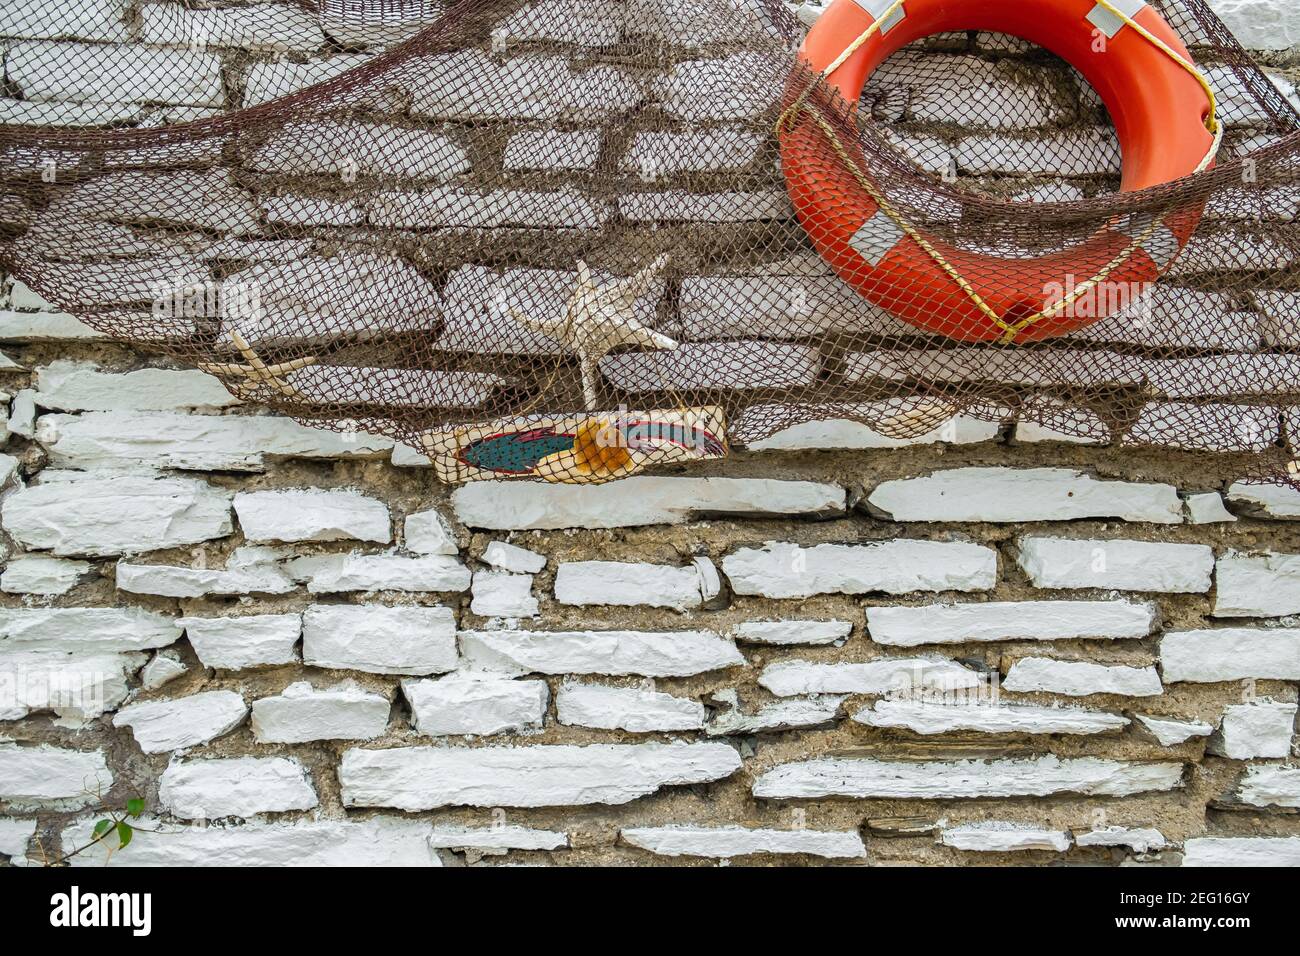 White brick wall decorated with fishing nets, ornamental fish, starfish and orange life buoy in a fish restaurant. Stock Photo